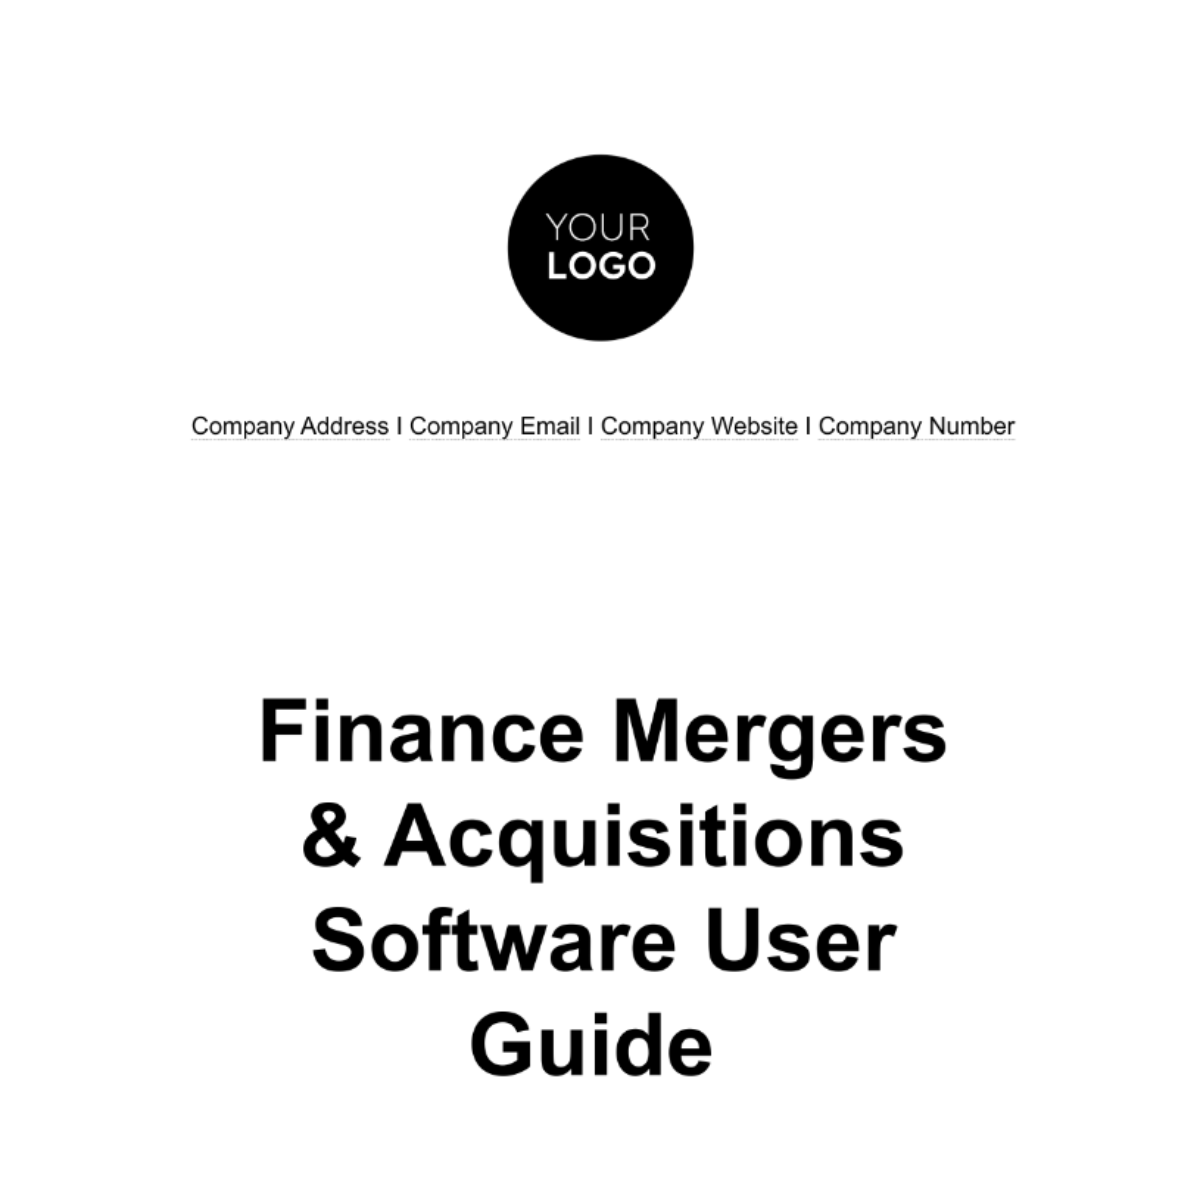 Free Finance Mergers & Acquisitions Software User Guide Template